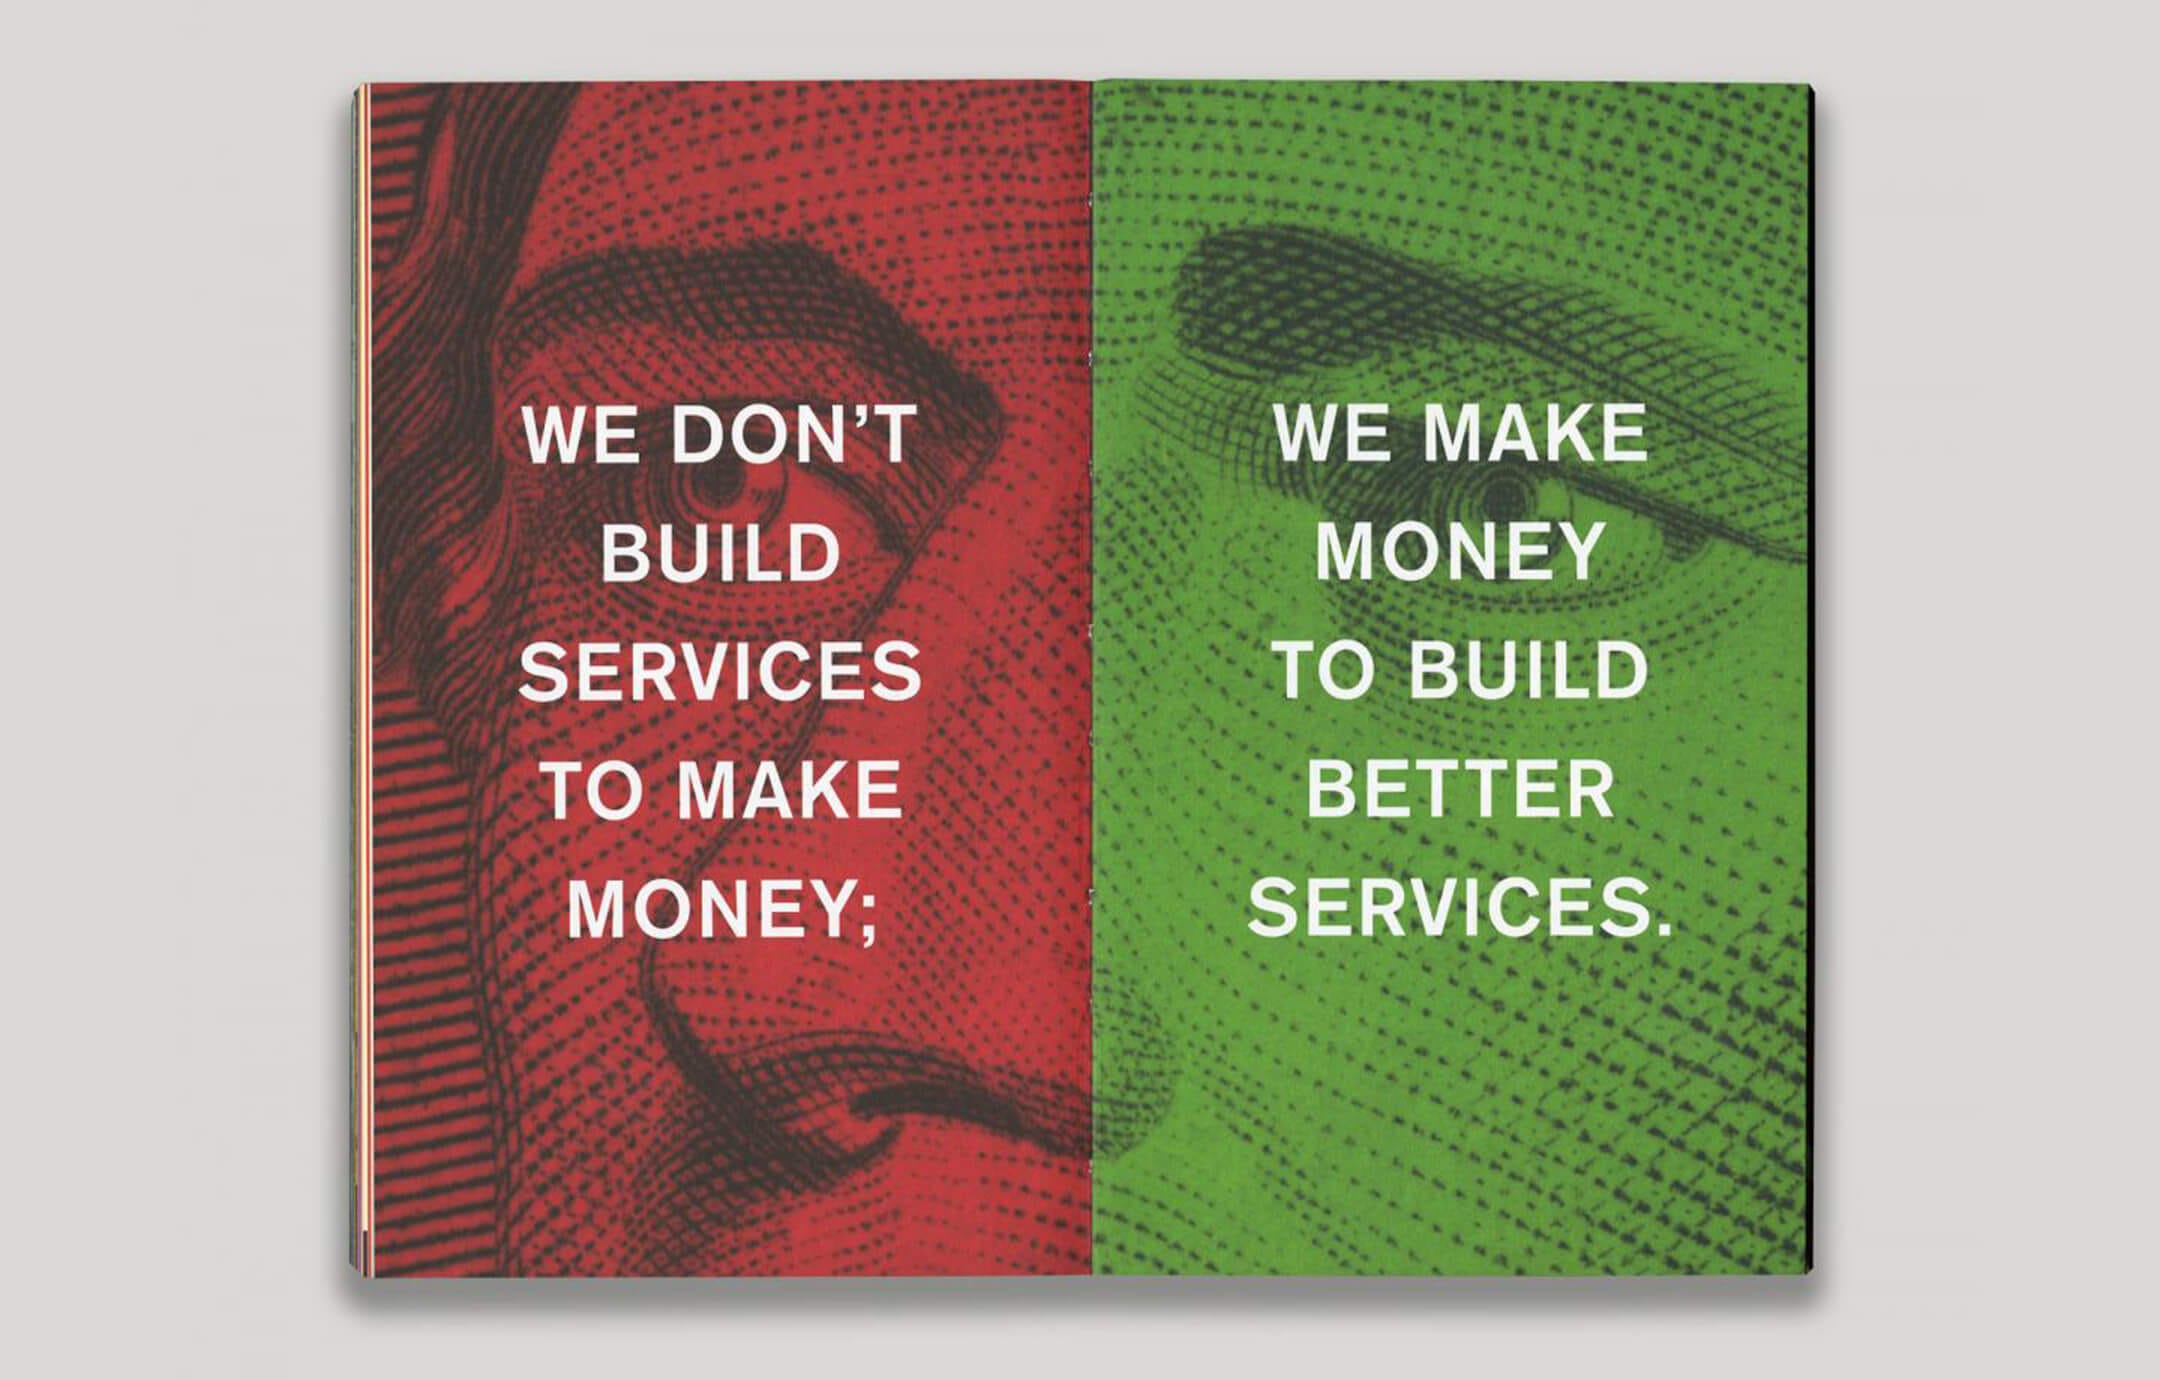 Spread from Facebook’s "culture book” featuring two full-bleed, extremely zoomed-in images of money. On the left-hand page the face is tinted red and the words "We don't build services to make money;" are overlaid in white. On the right the face is tinted green and the text reads, "We make money to build better services."